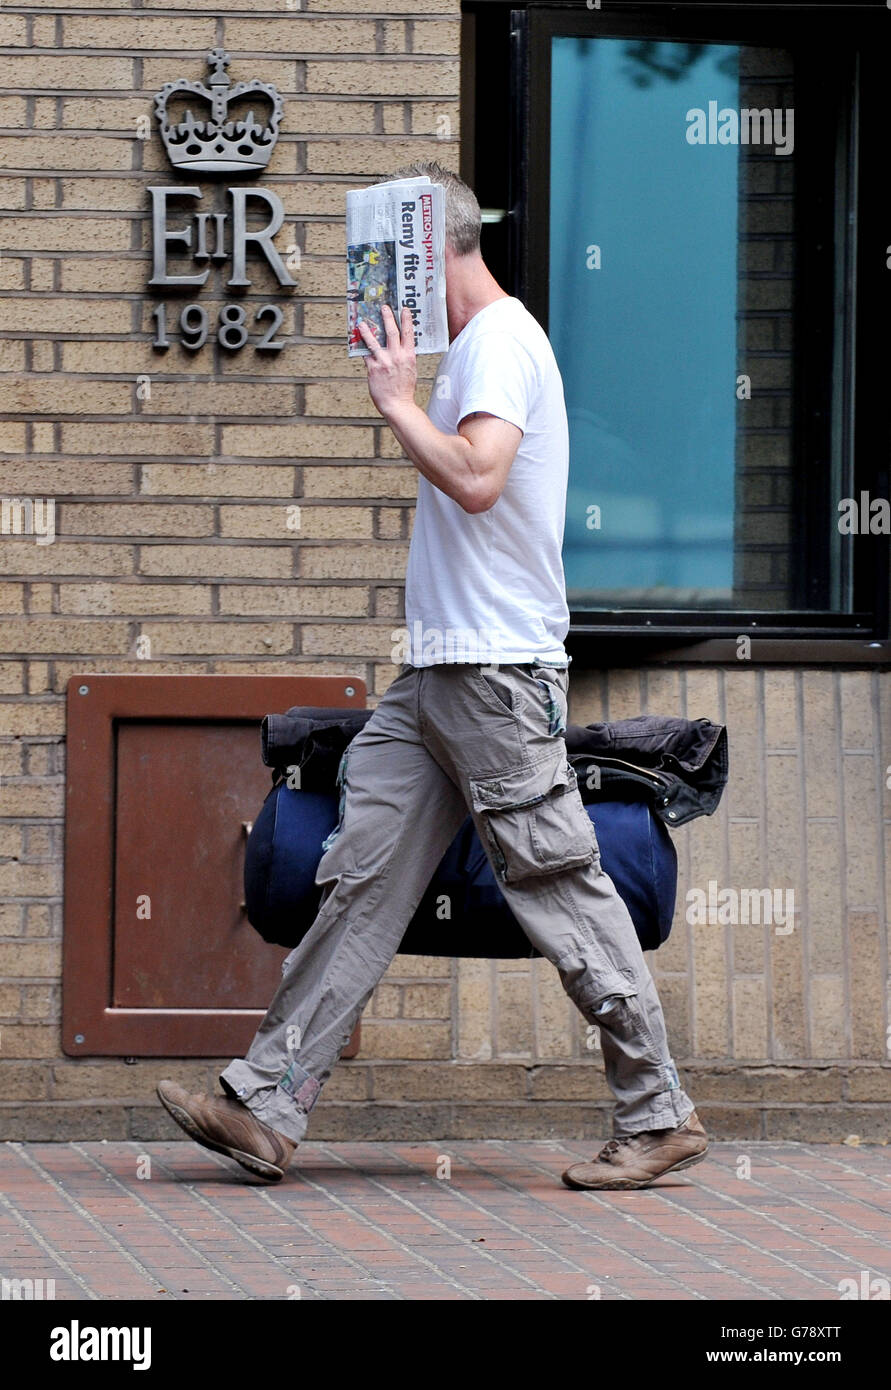 Adrian Horan arrives at Southwark Crown Court, where he is due for sentence for fleecing Royal Marsden cancer hospital of £642,827, along with other defendants, Stacey Tipler, Scott Chaplin, Adrian Horan , Thomas Quinlan, Clinton Woolery, Russell Baker, William Flynn and Roy Harriott. Stock Photo